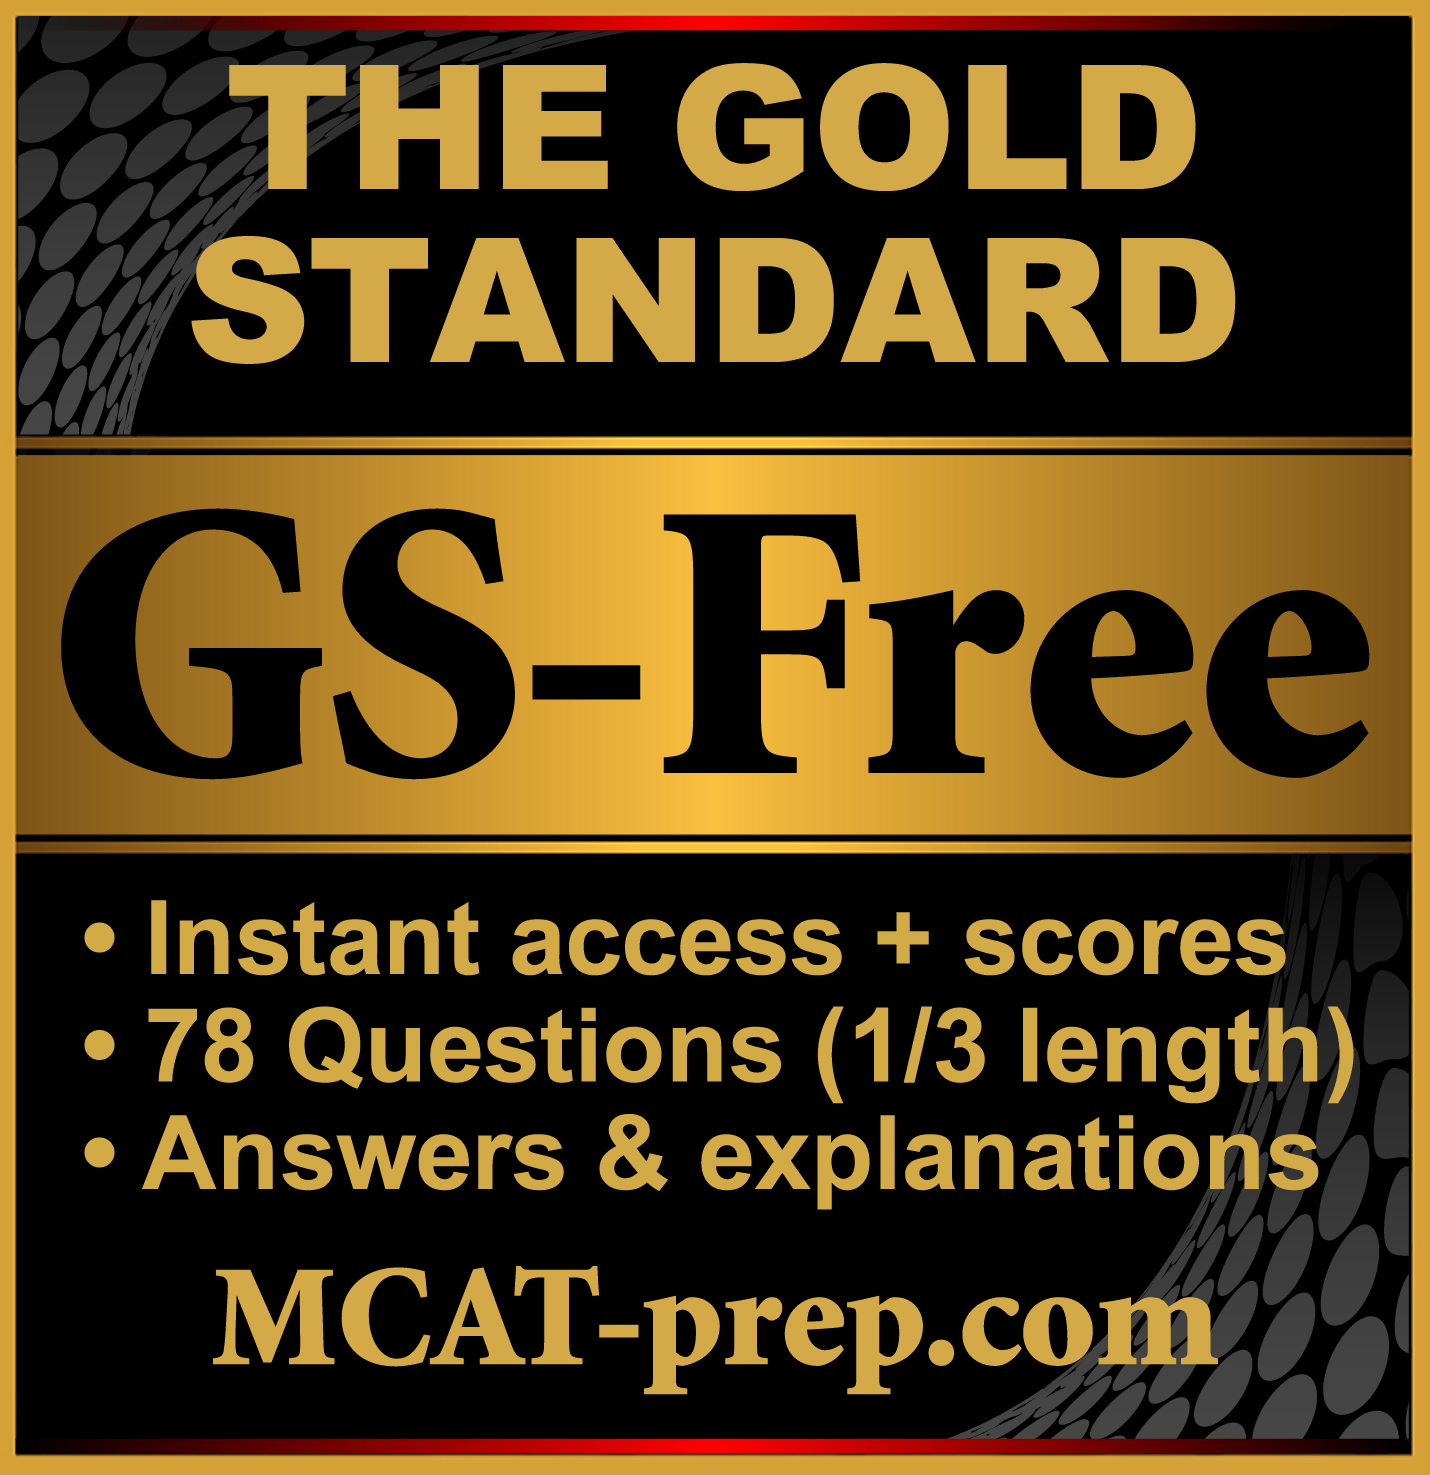 How do you get free MCAT practice tests?